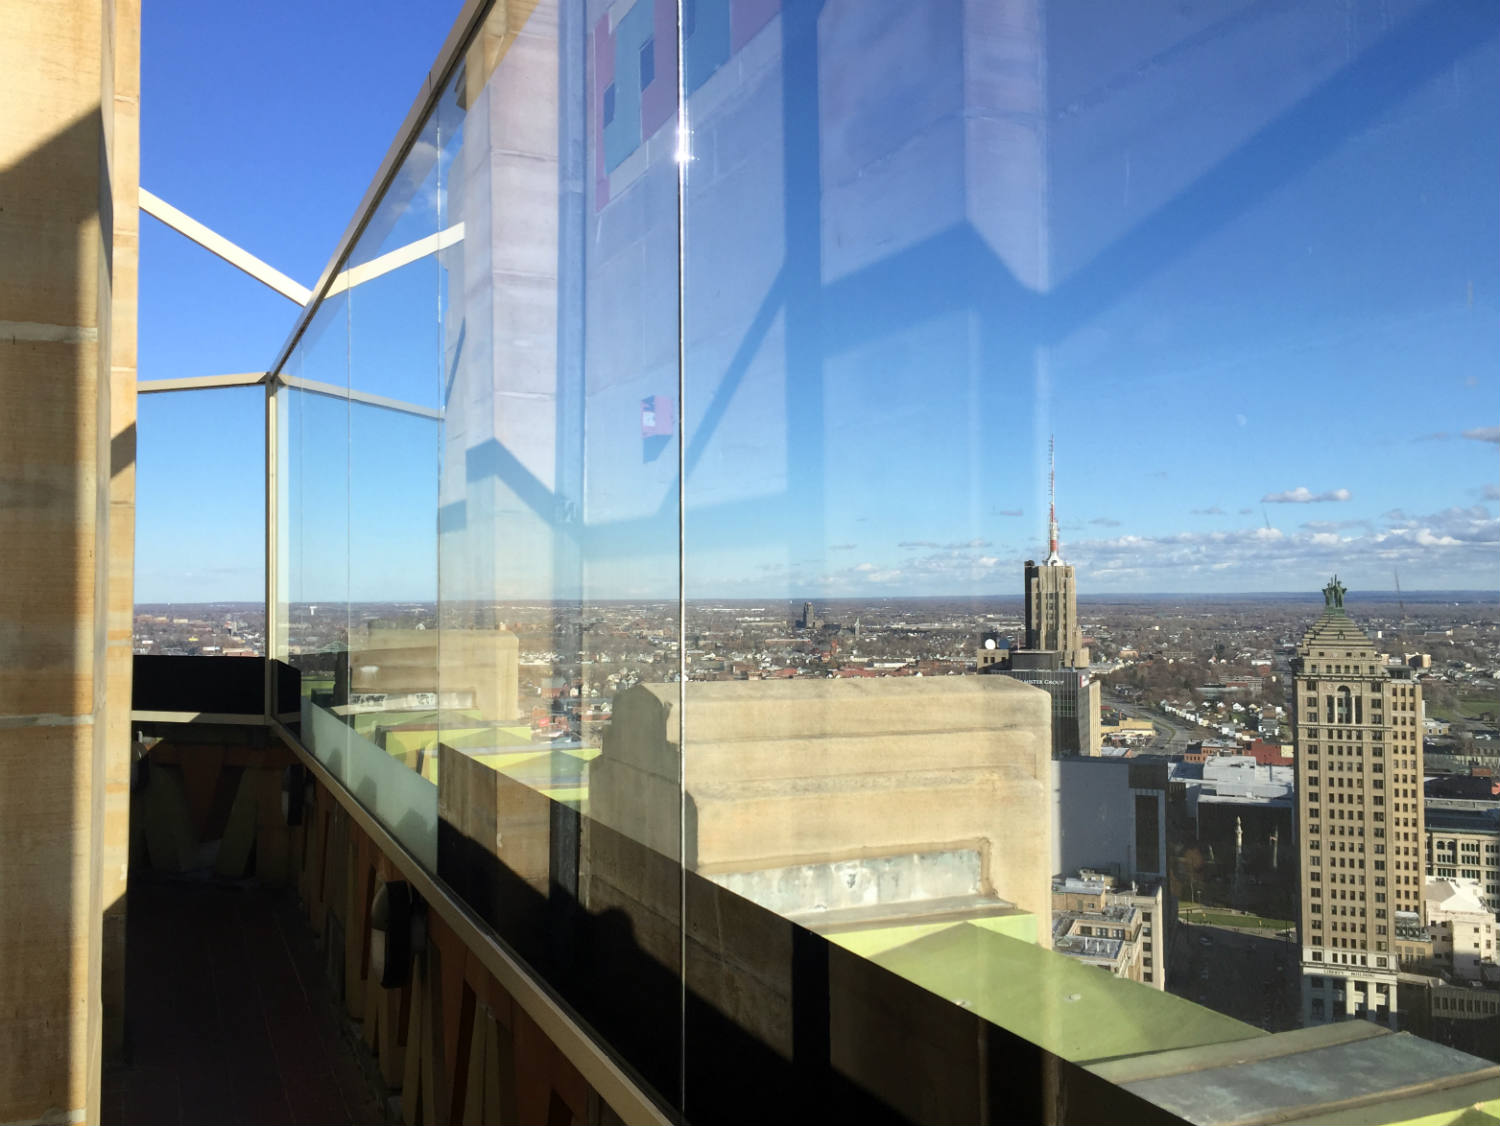 VIew of Horizon from Top Floor of Buffalo City Hall